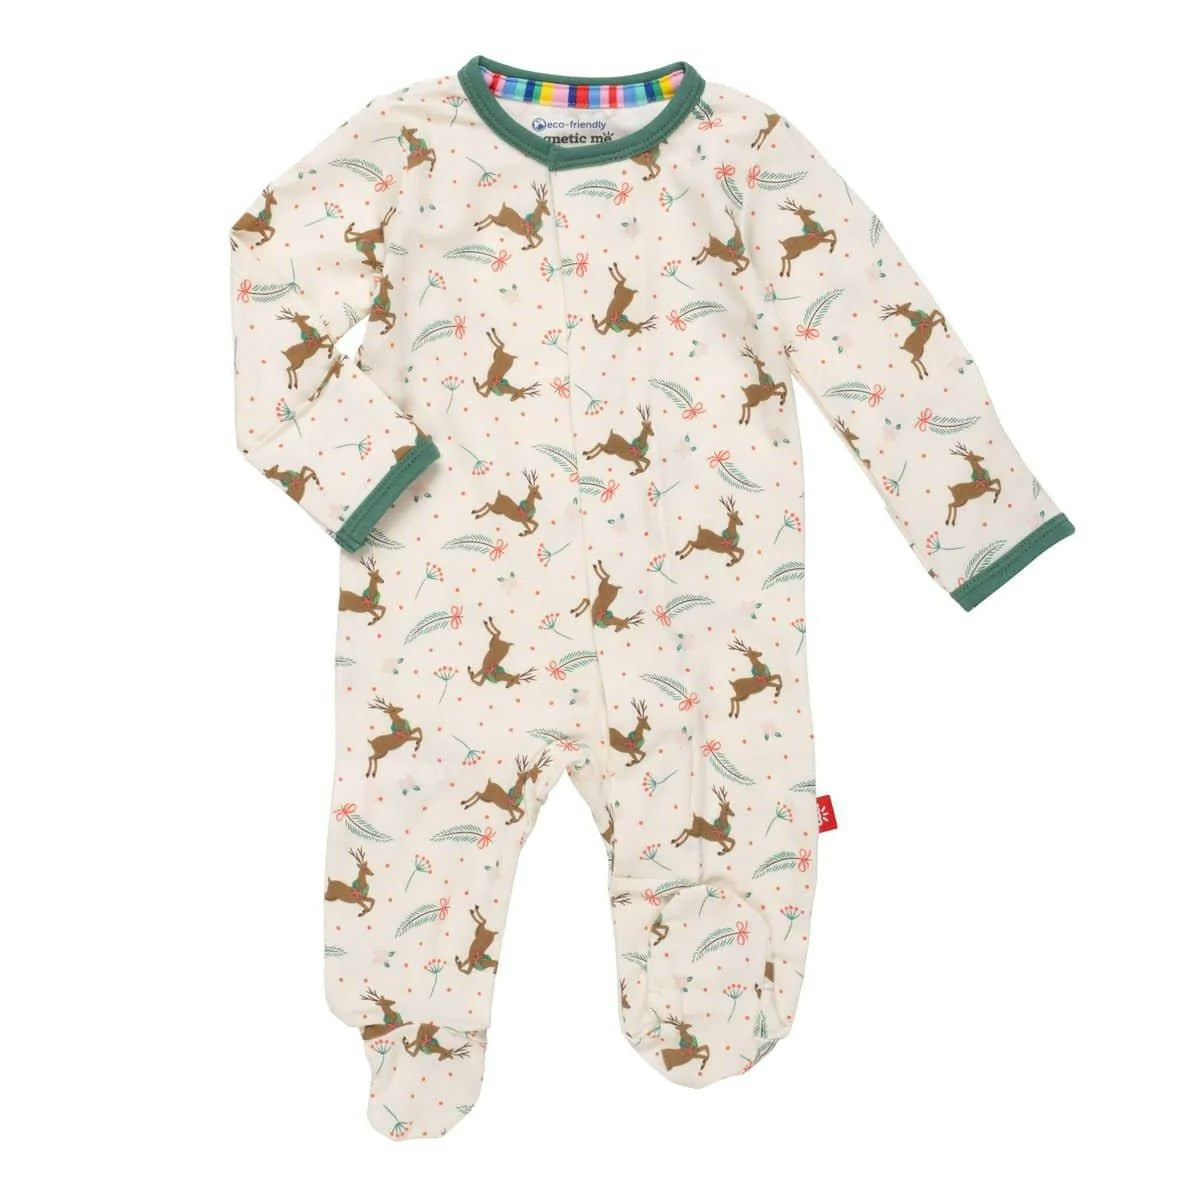 Christmas Pajama Set: Family Friendly Outfits For Babies And Dogs From  Pang08, $9.63